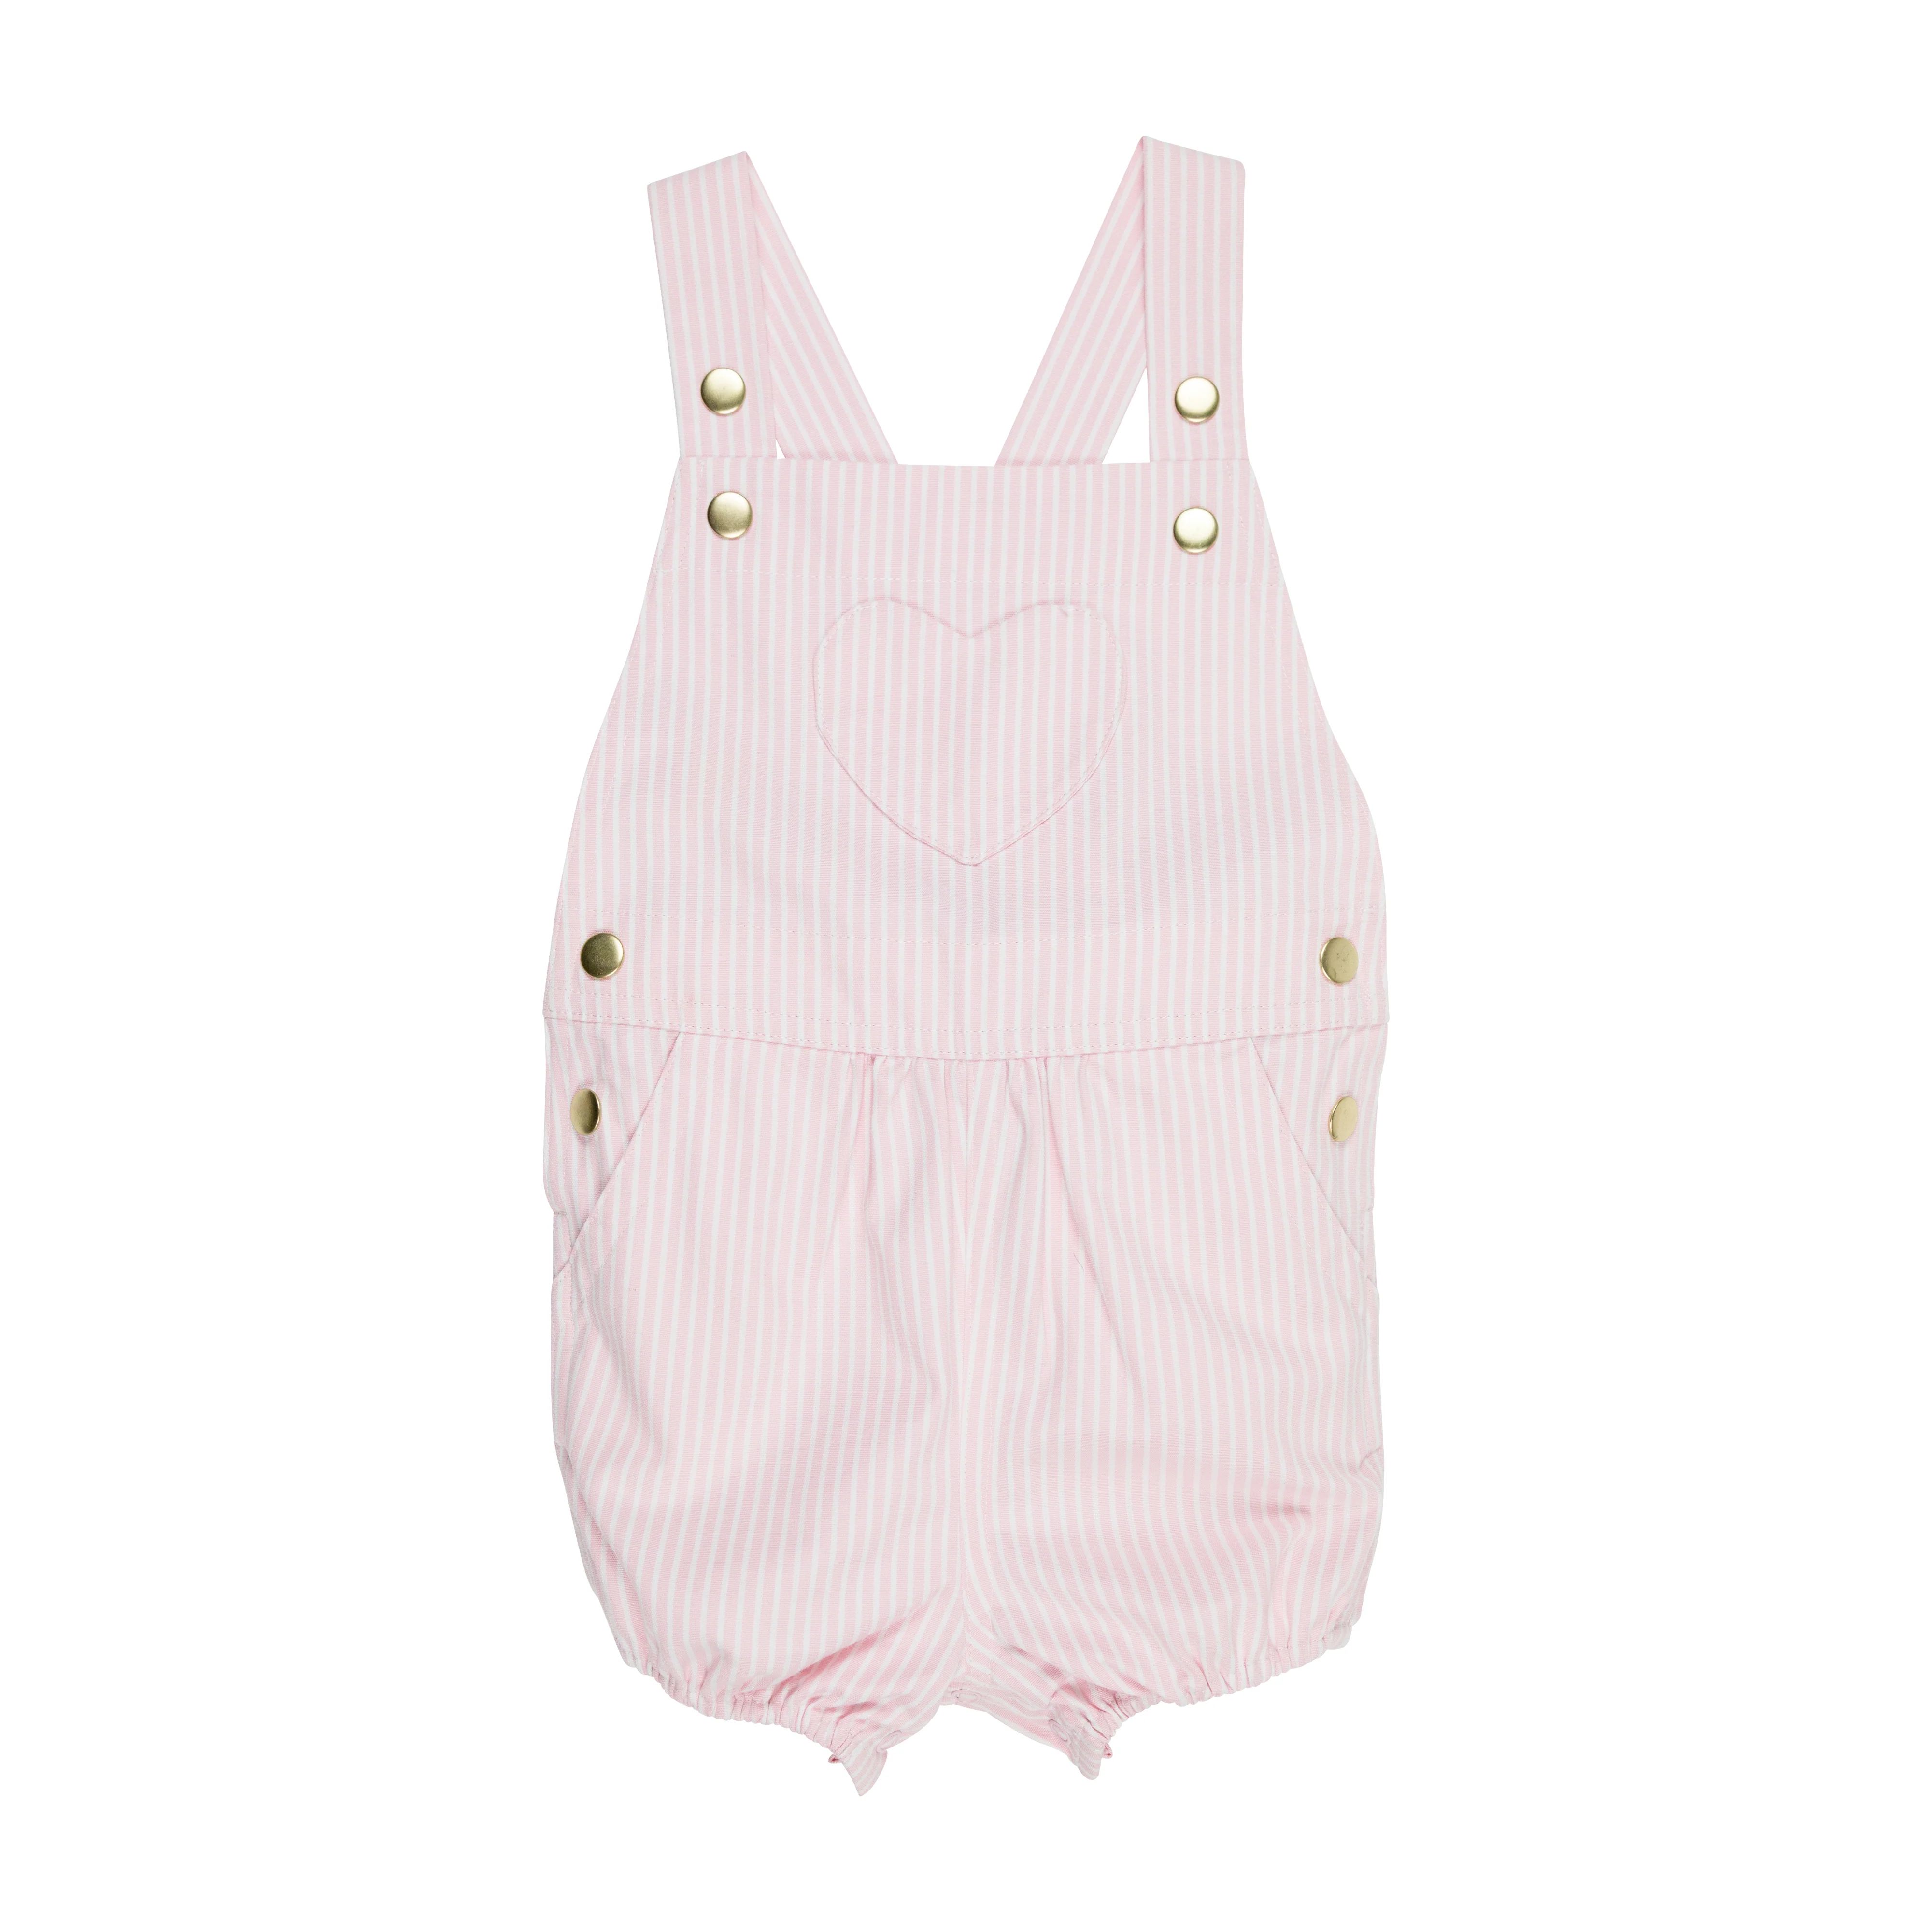 Channing Choo Choo Overalls - Palm Beach Pink & Worth Avenue White Stripe with Heart Applique | The Beaufort Bonnet Company